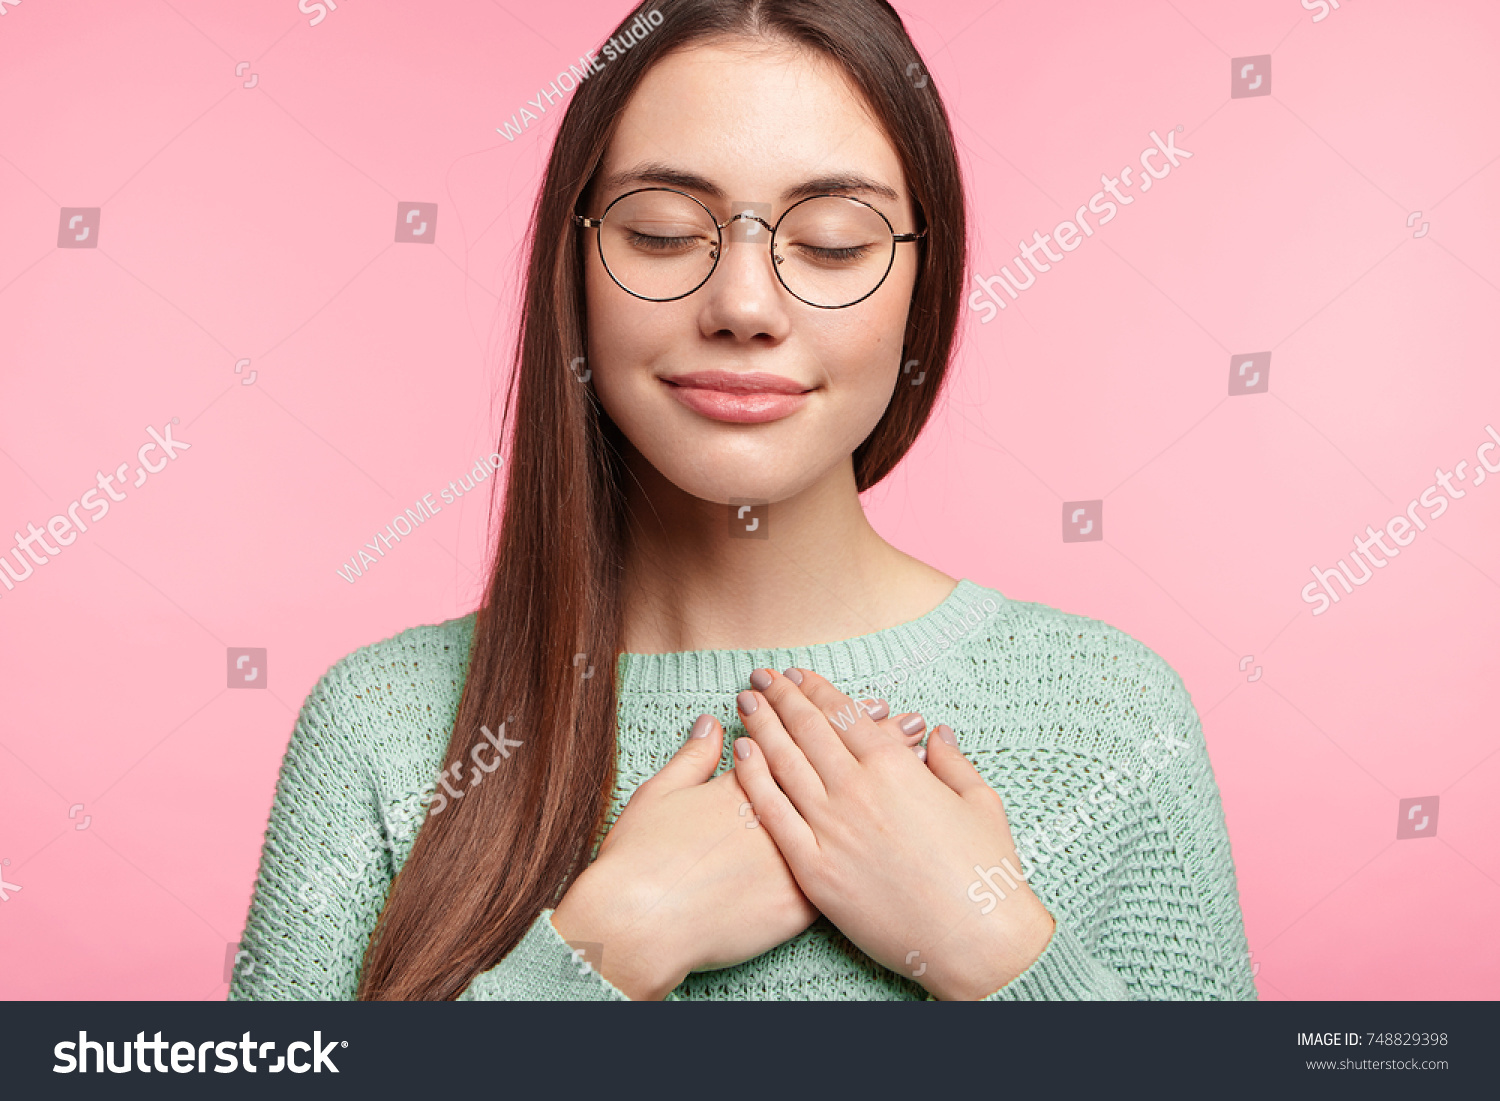 Faithful woman closes eyes and keeps hands on chest near heart, shows her kindness or favour, expresses sincere emotions, being kind hearted and honest. Body language and real feelings concept #748829398